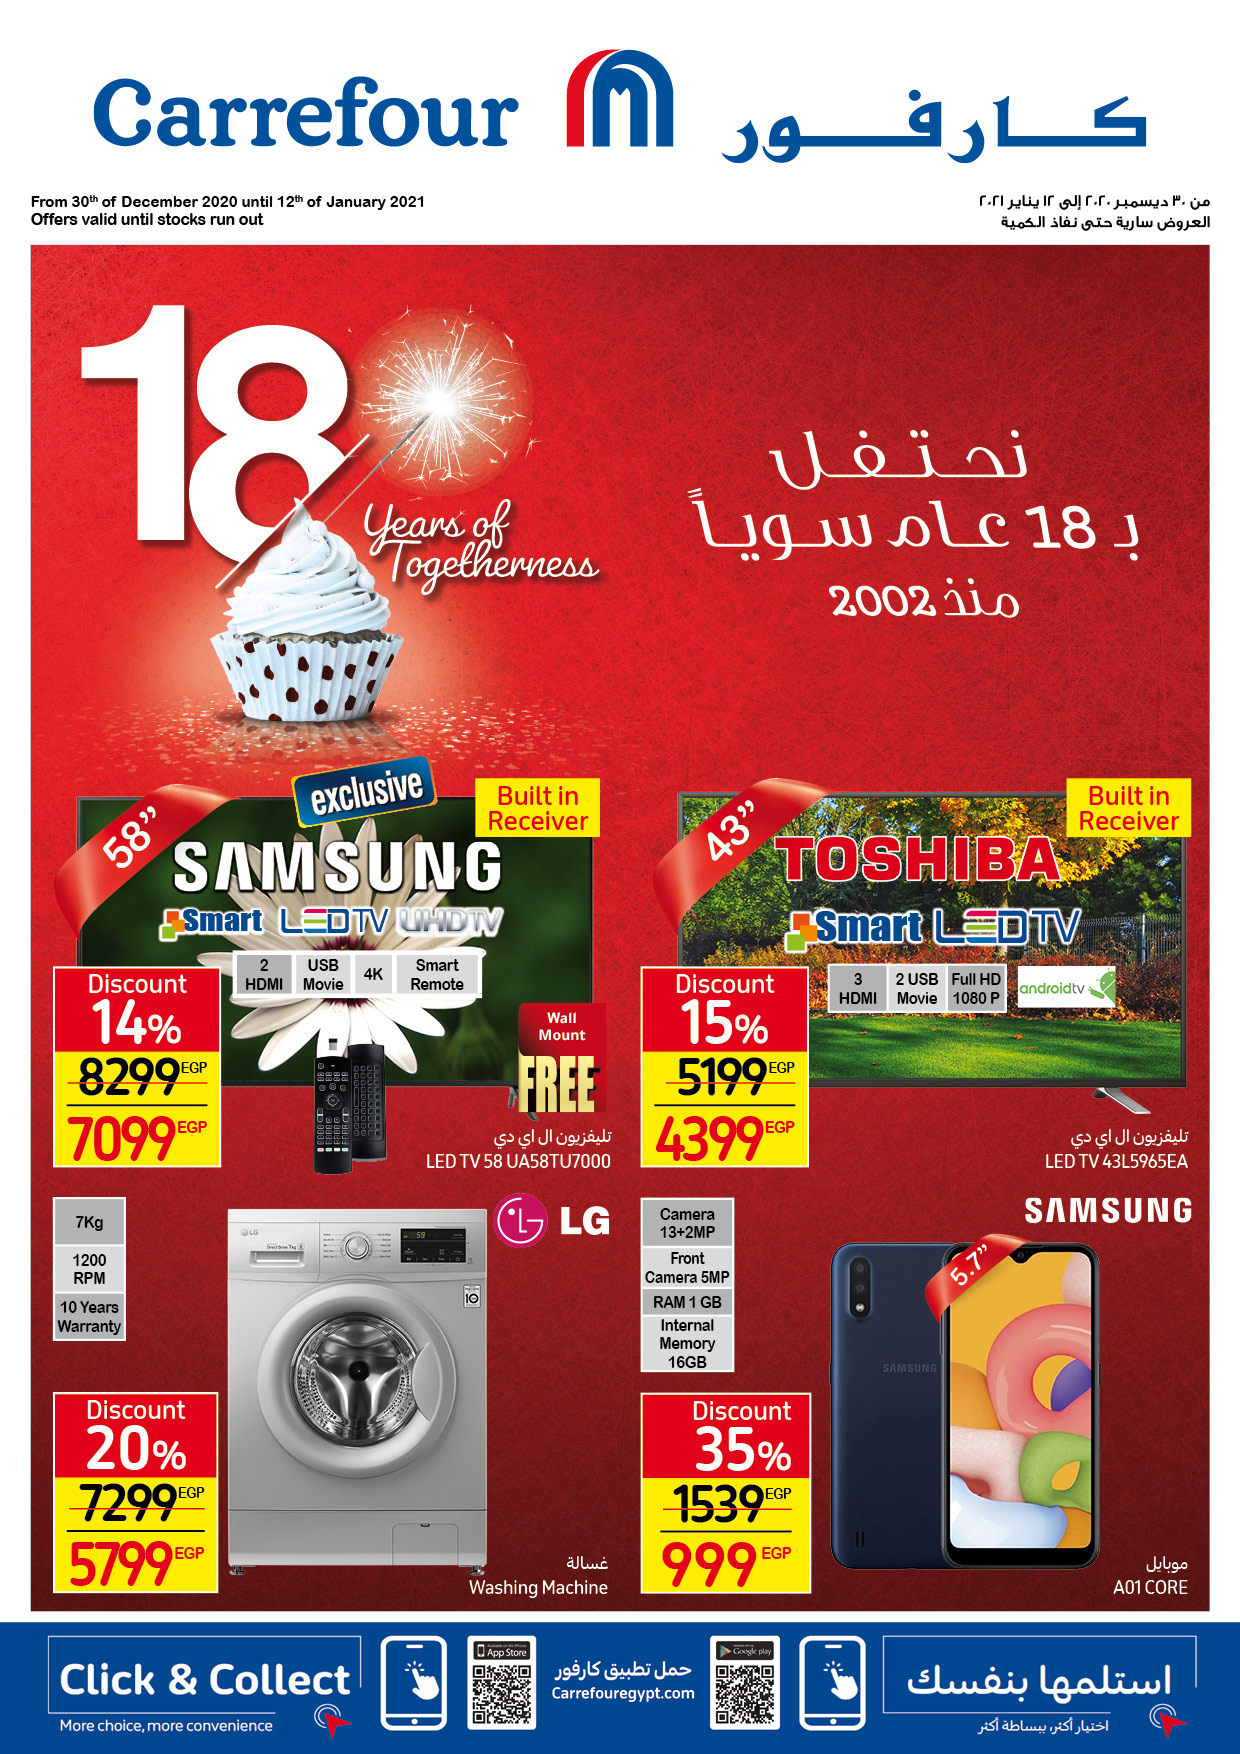 Carrefour Christmas offers for the New Year 2021